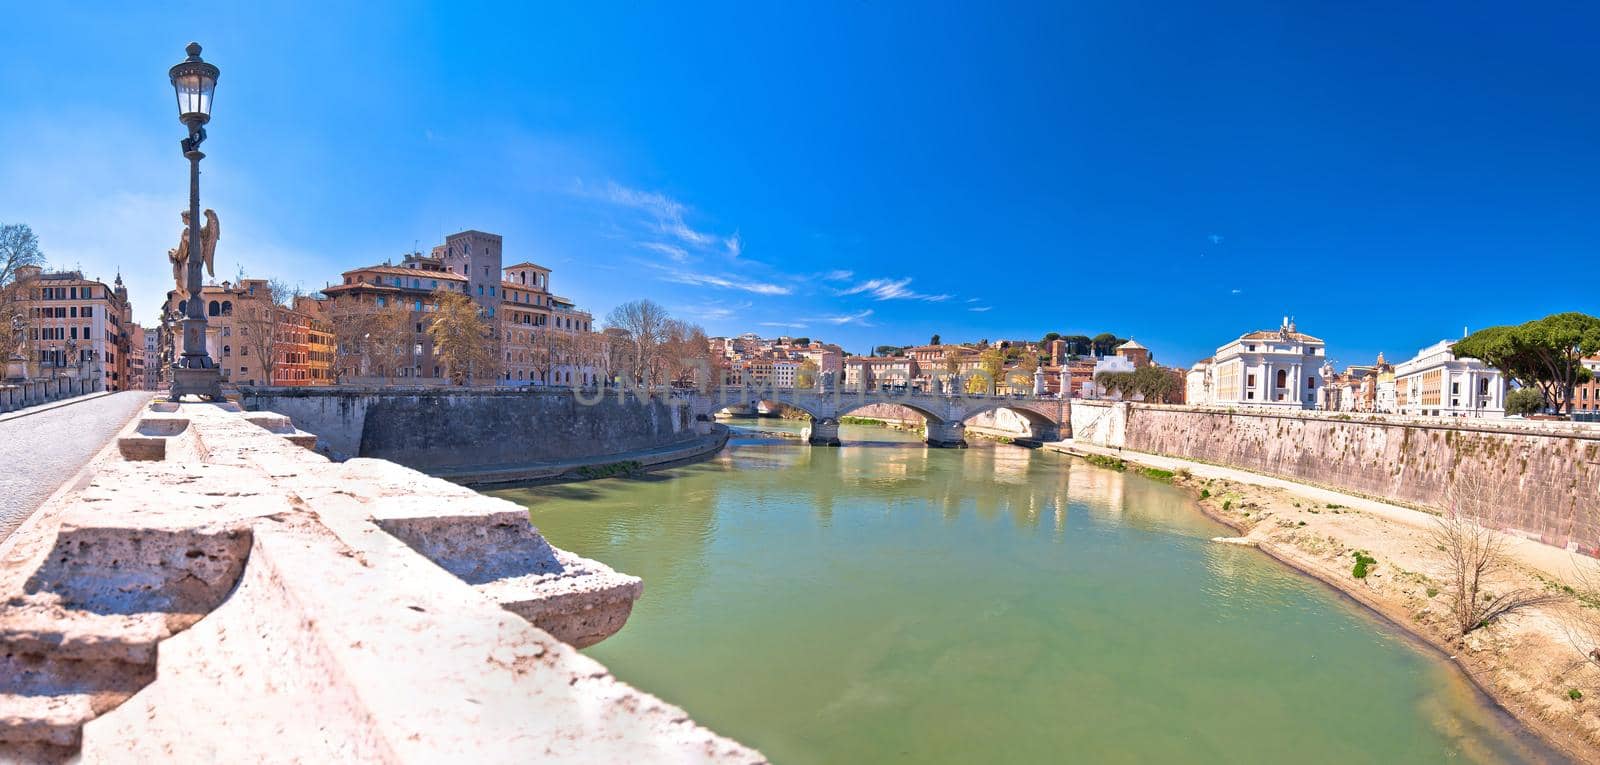 Rome. Tiber river and Rome historic cityscape and Vatican view by xbrchx